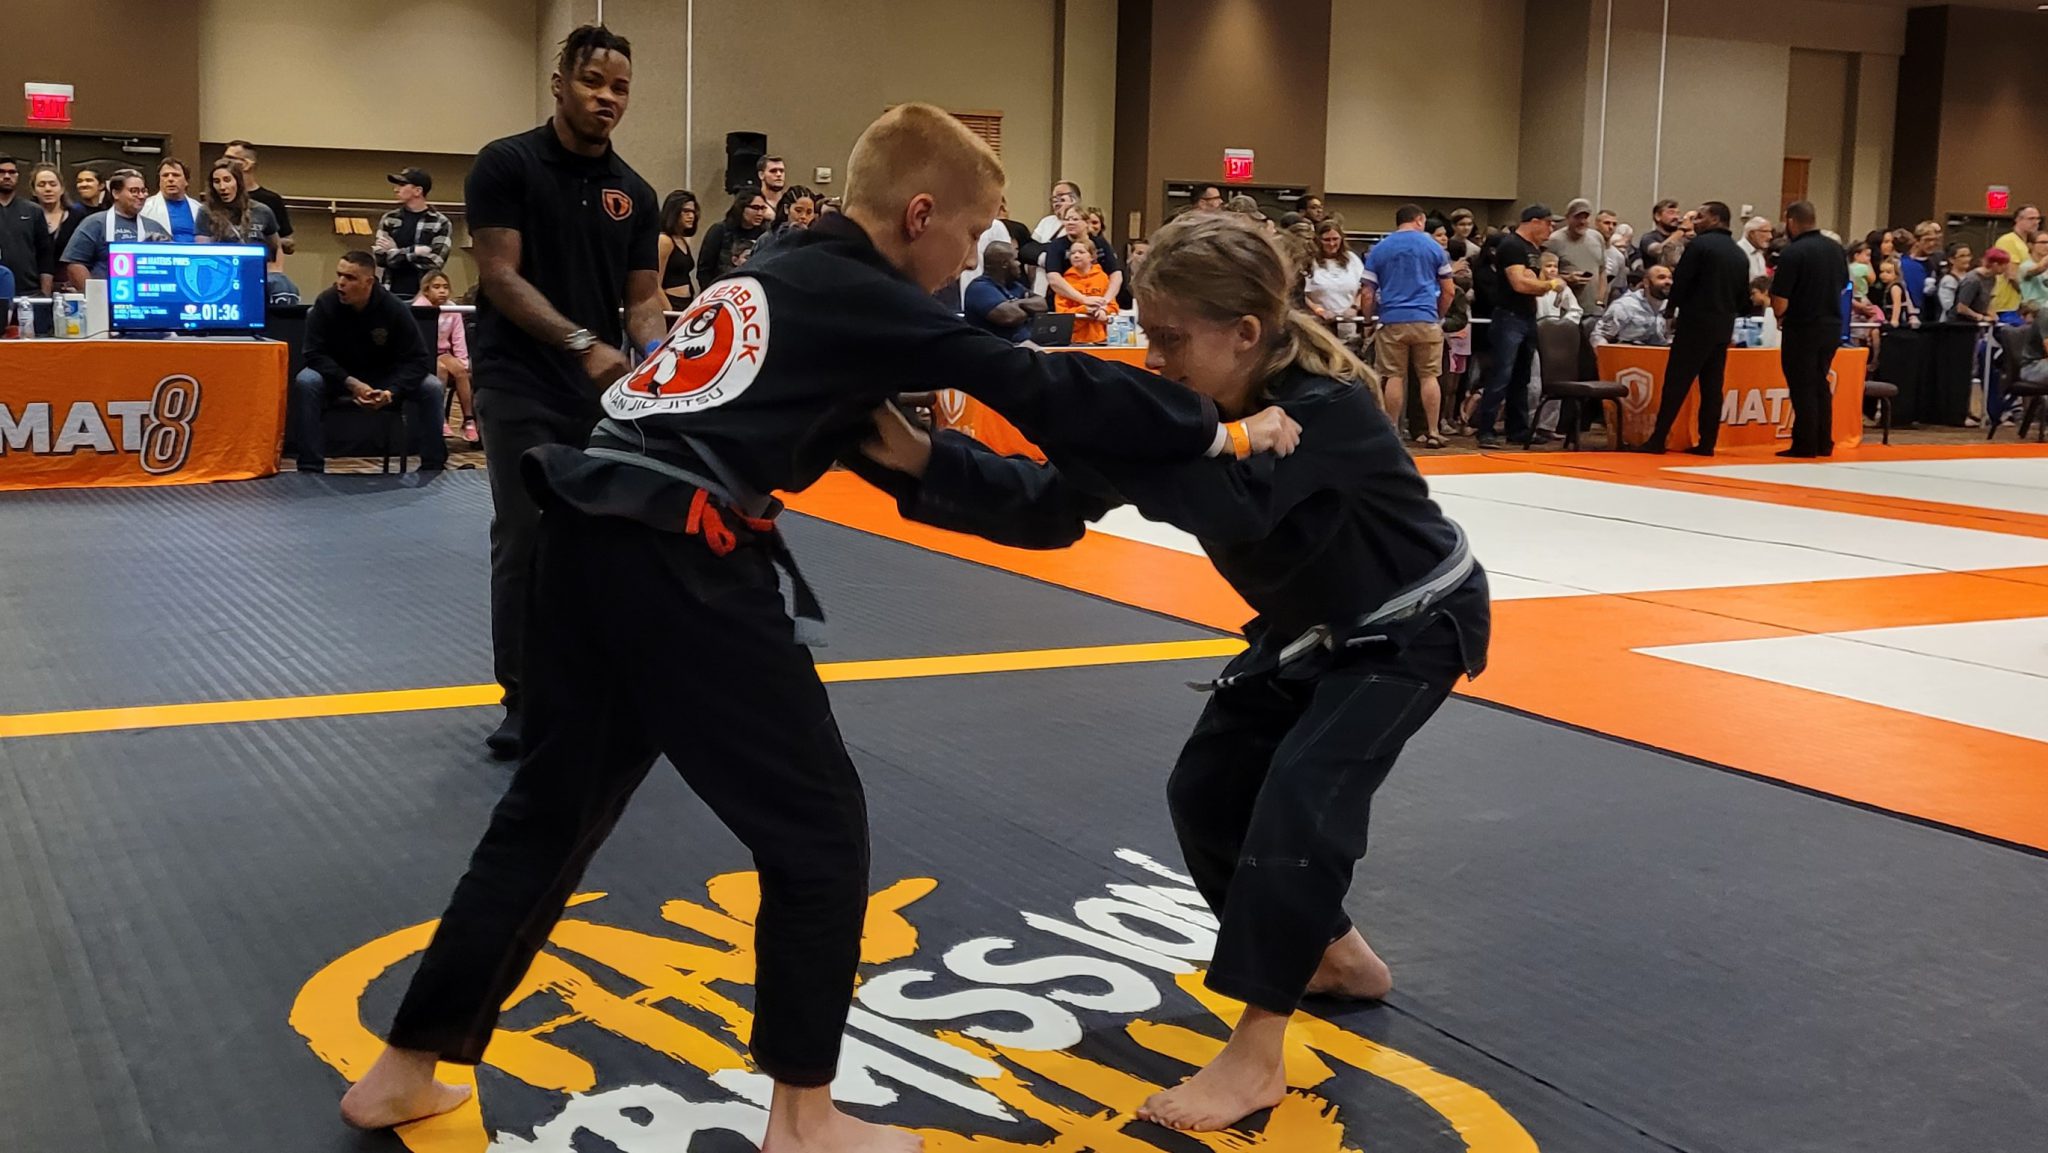 Silverback BJJ Competes at Grappling Industries Tournament in Wisconsin